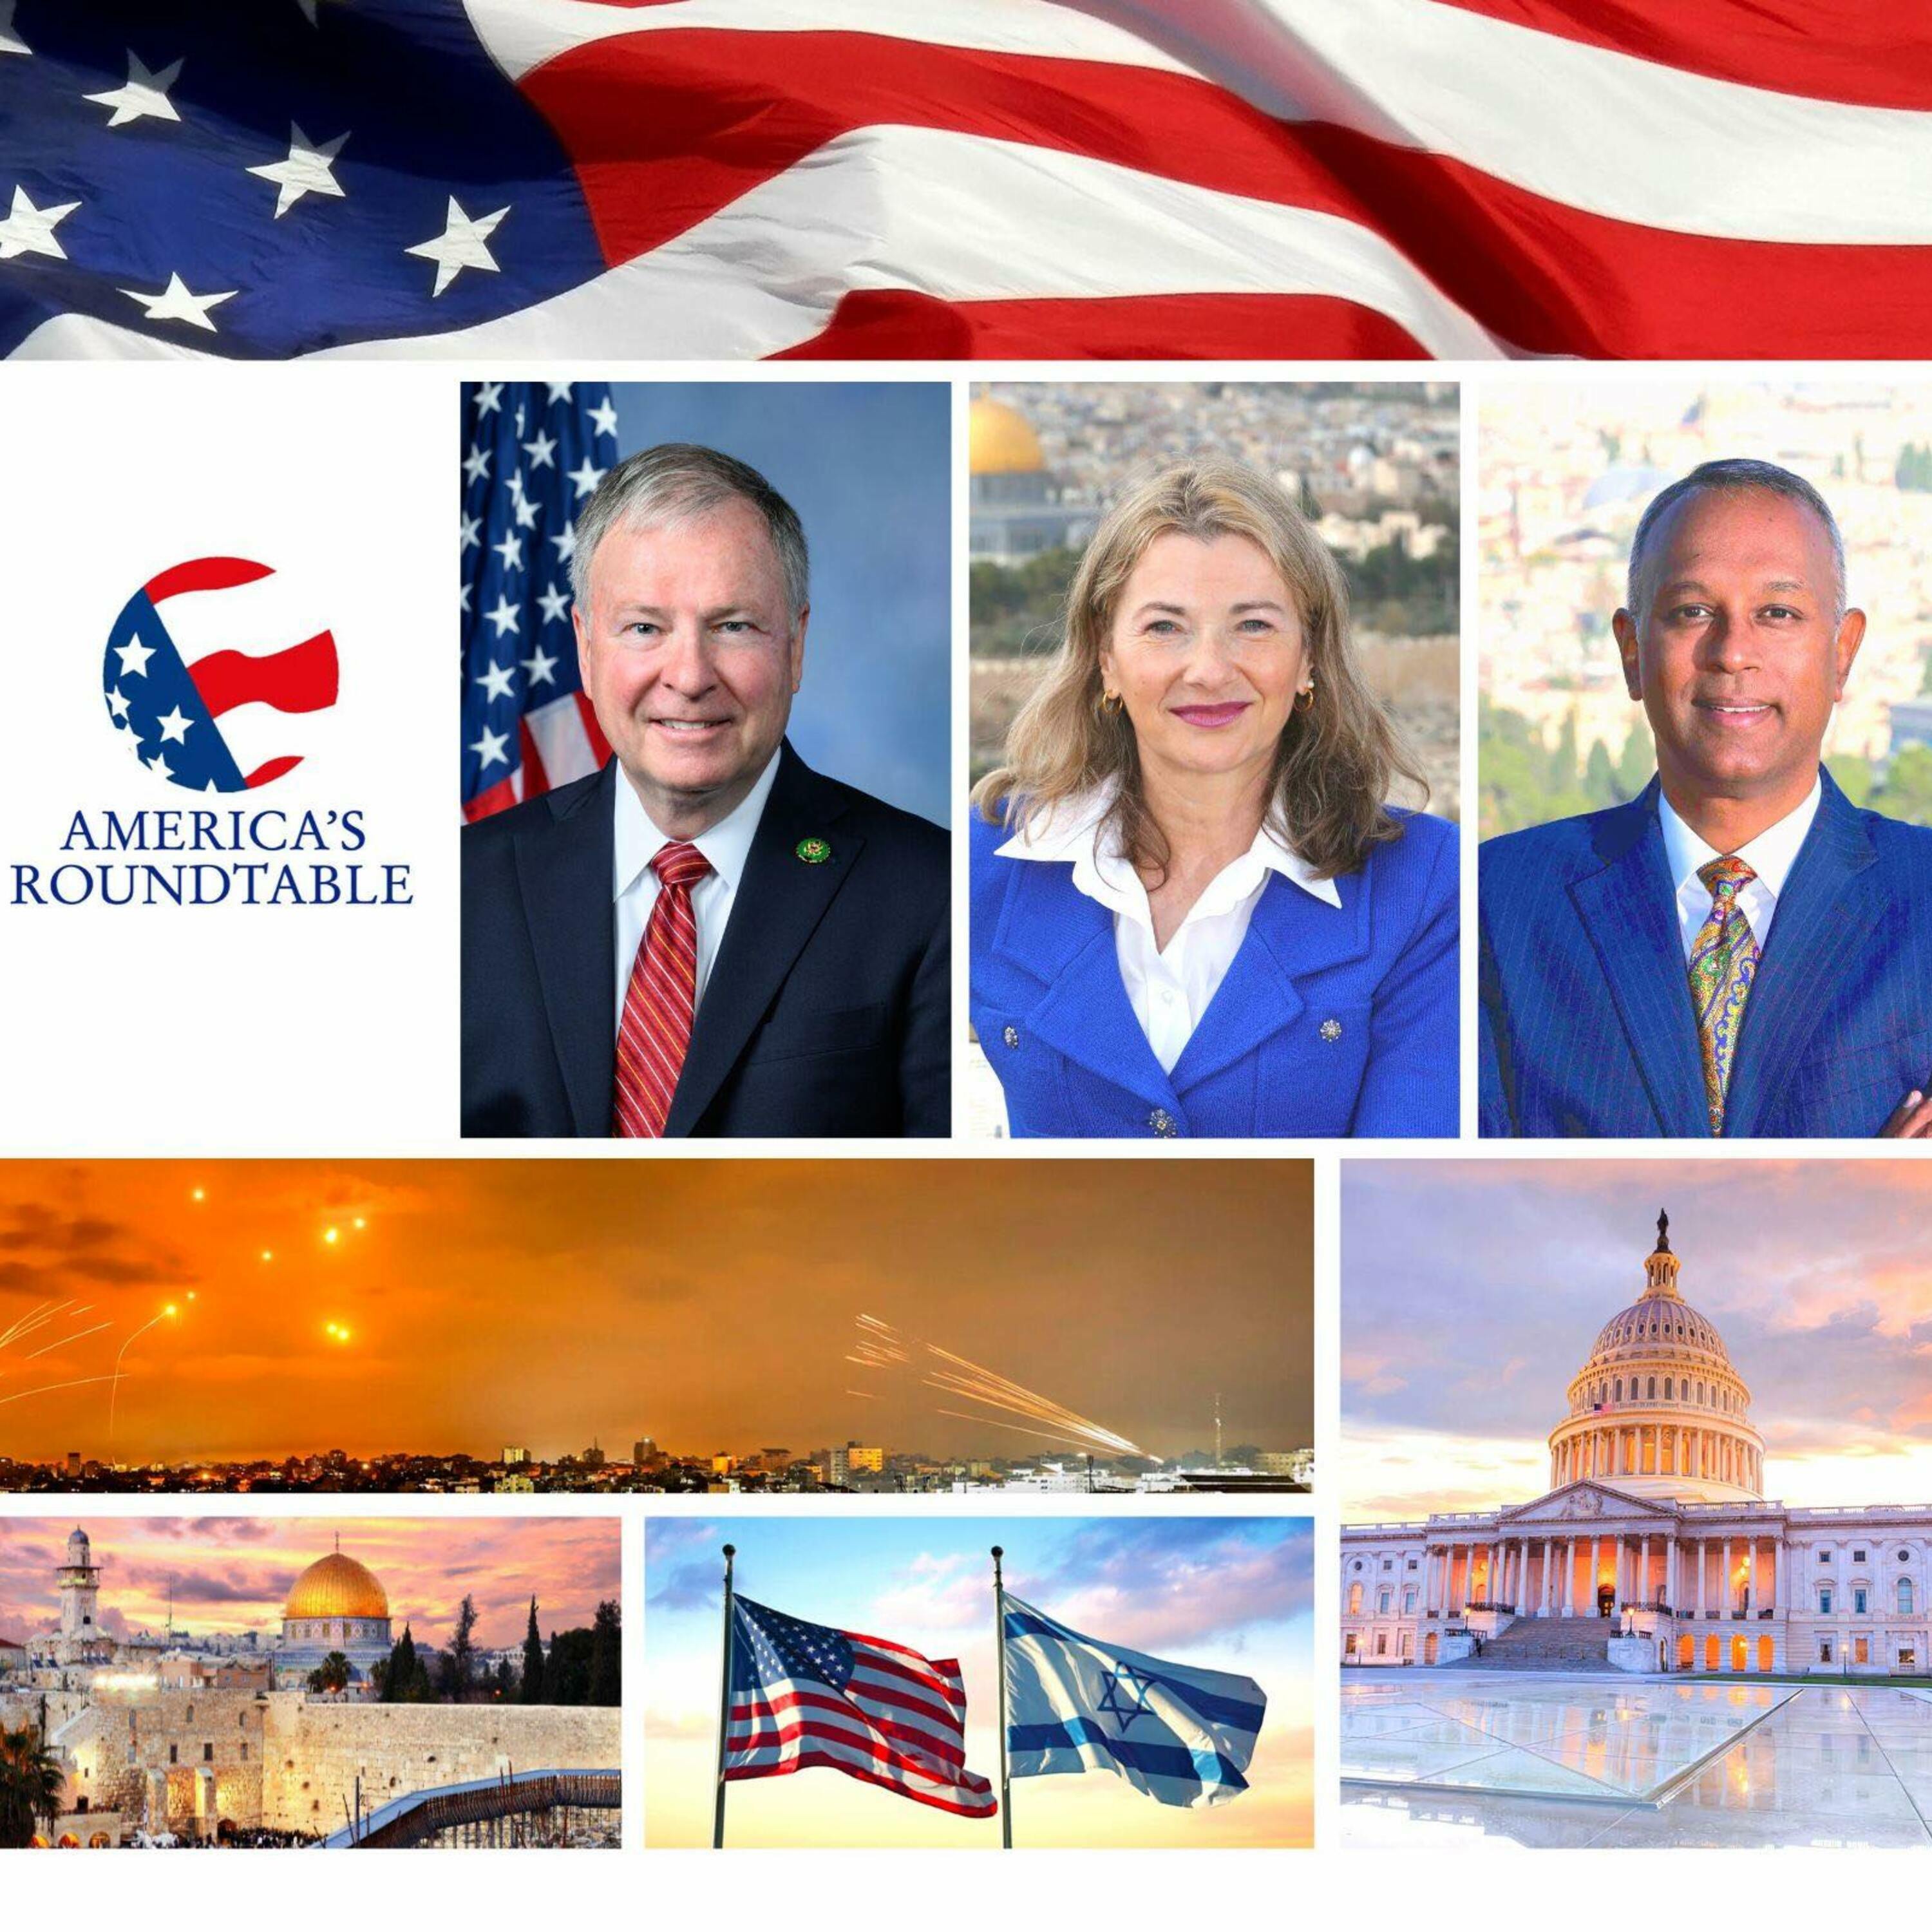 America's Roundtable | US Congressman Doug Lamborn | Israel at War | US Leadership in the Middle East — A Region Facing Significant Instability